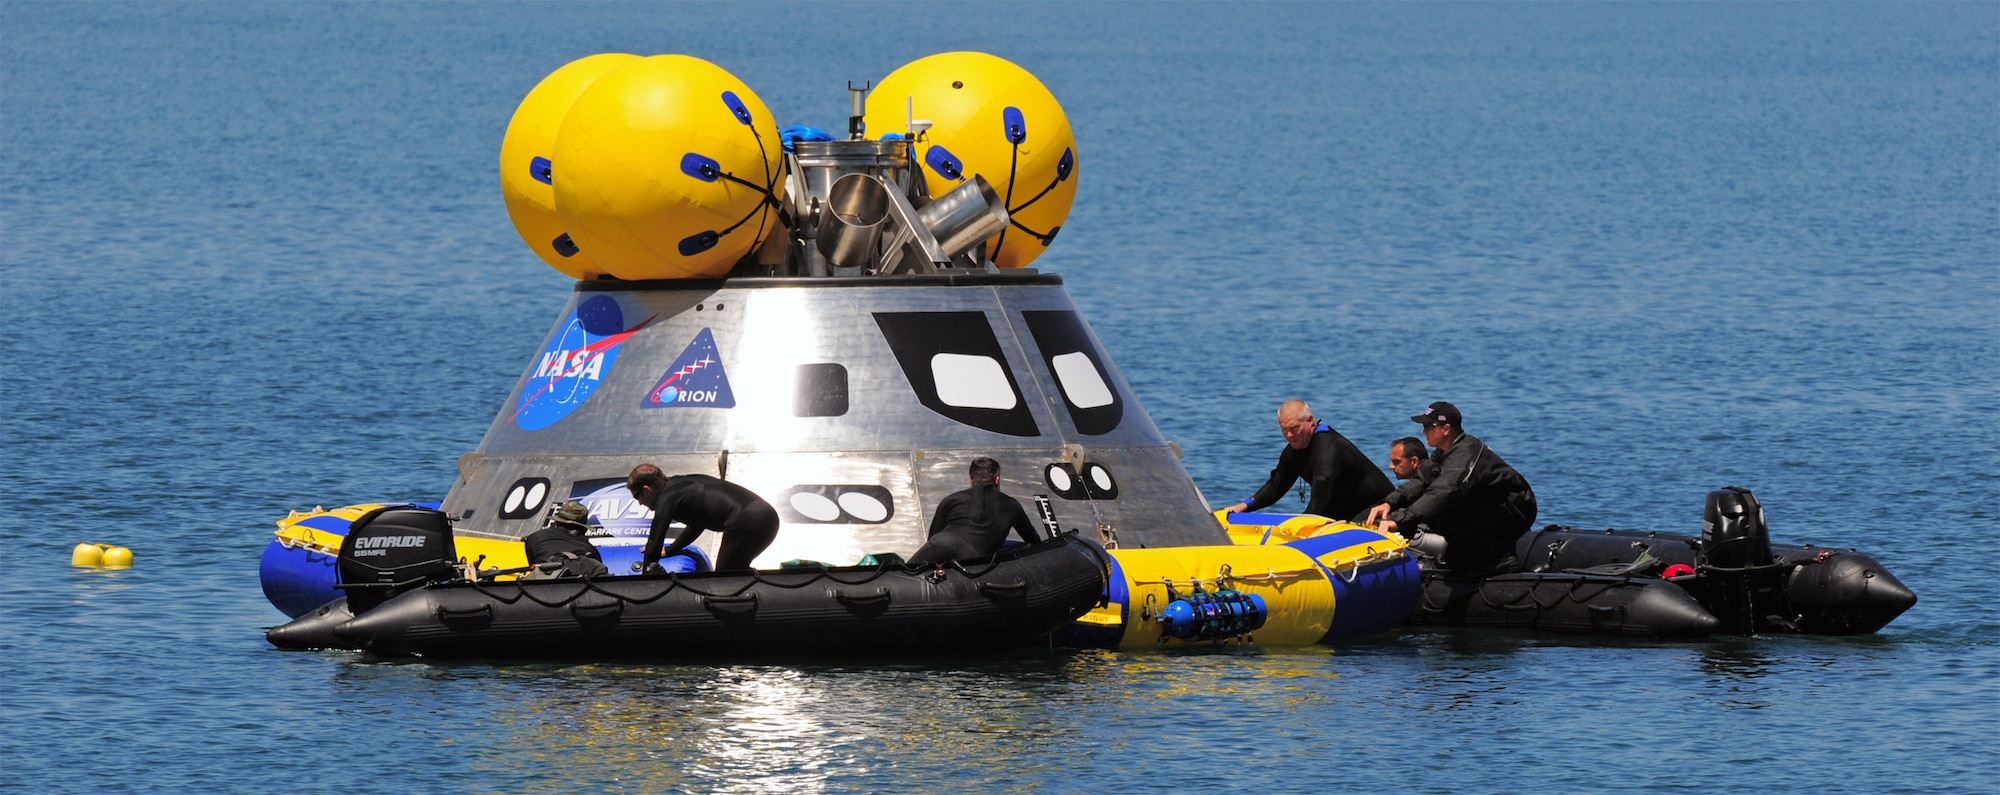 Pararescuemen deploy an inflatable flotation collar during recovery testing on a mockup of the Orion crew exploration vehicle March 8 at the Trident Basin at Port Canaveral, Fla. The collar is designed both to stabilize the capsule after water landing and provide a platform for recovery personnel to stand on during the operation. Reservists from the Reserve's 920th Rescue Wing provide contingency medical and recovery support for all NASA shuttle launches. (U.S. Air Force photo/Tech. Sgt. Paul Flipse) 